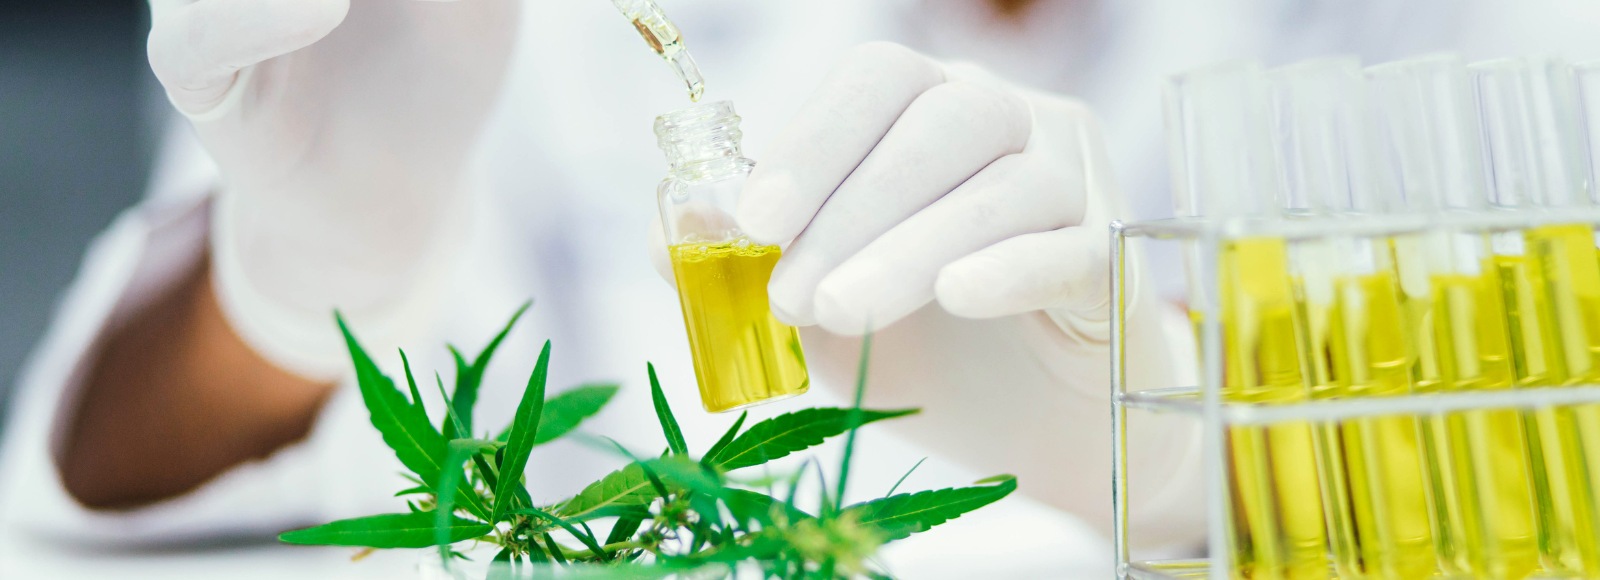 Cannabis extract in a lab